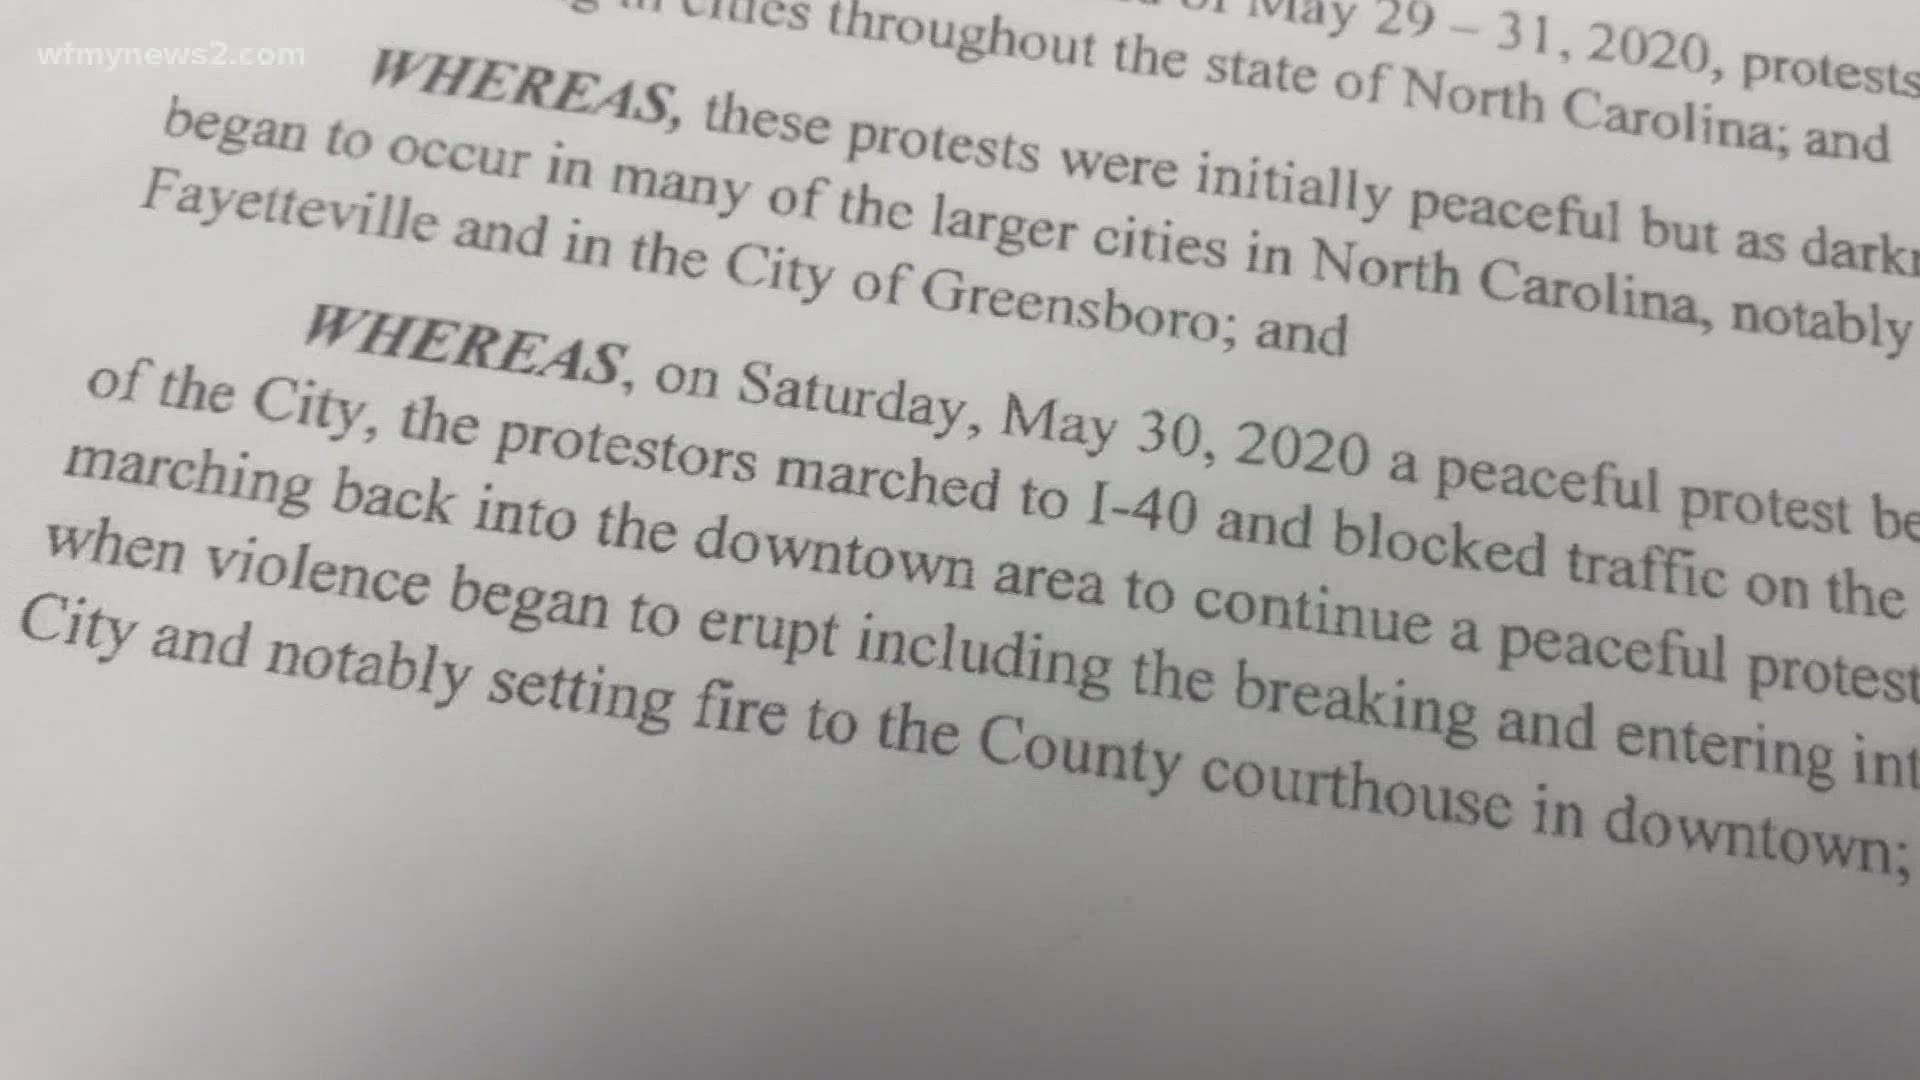 The city of Greensboro curfew is from 8 pm to 6 am. That means travel is restricted in the city limits.